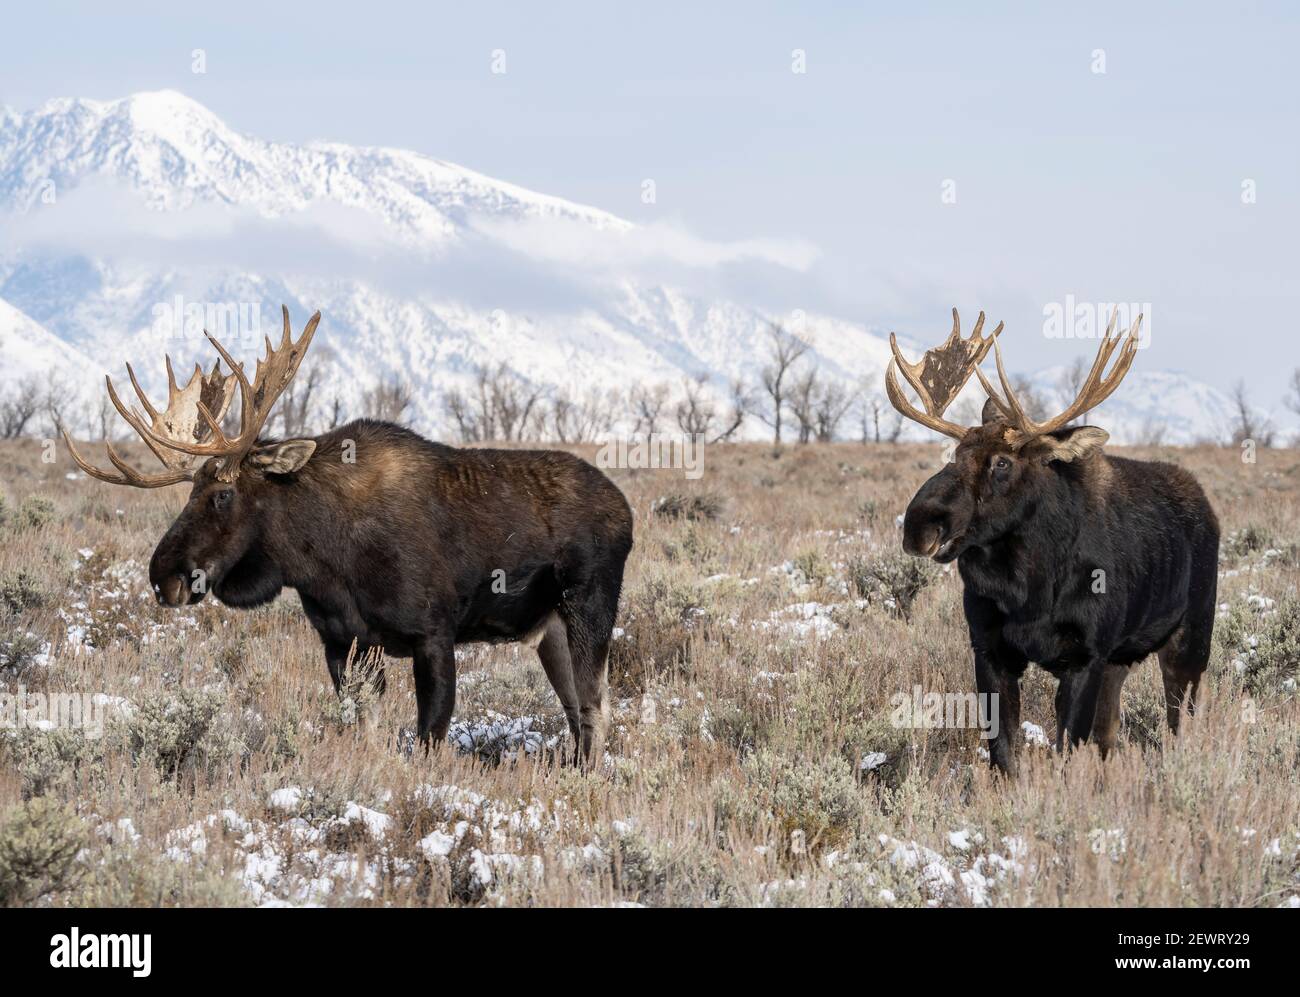 Two bull moose (Alces alces) standing in front of Teton Range, Grand Teton National Park, Wyoming, United States of America, North America Stock Photo